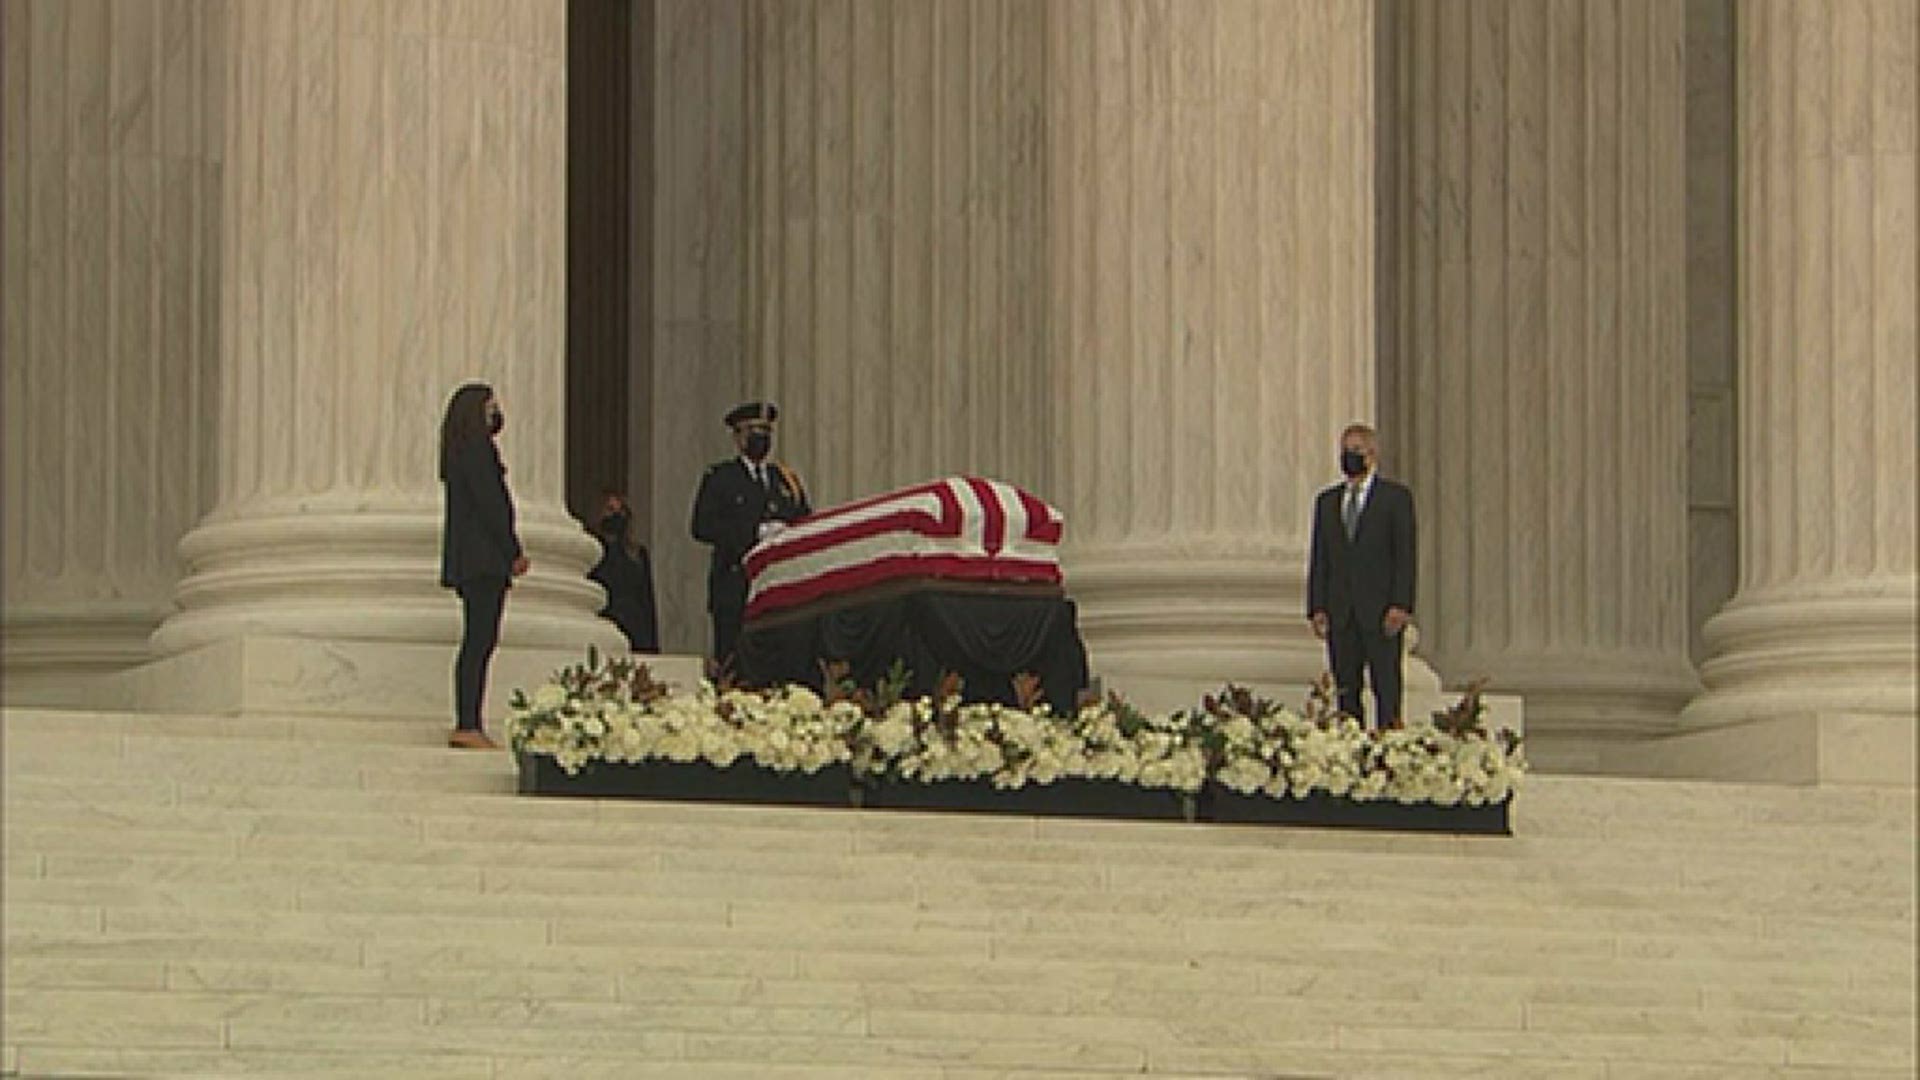 President Donald Trump was greeted with boos and chants of "vote him out" as he attended the outdoor memorial service for Justice Ruth Bader Ginsburg.